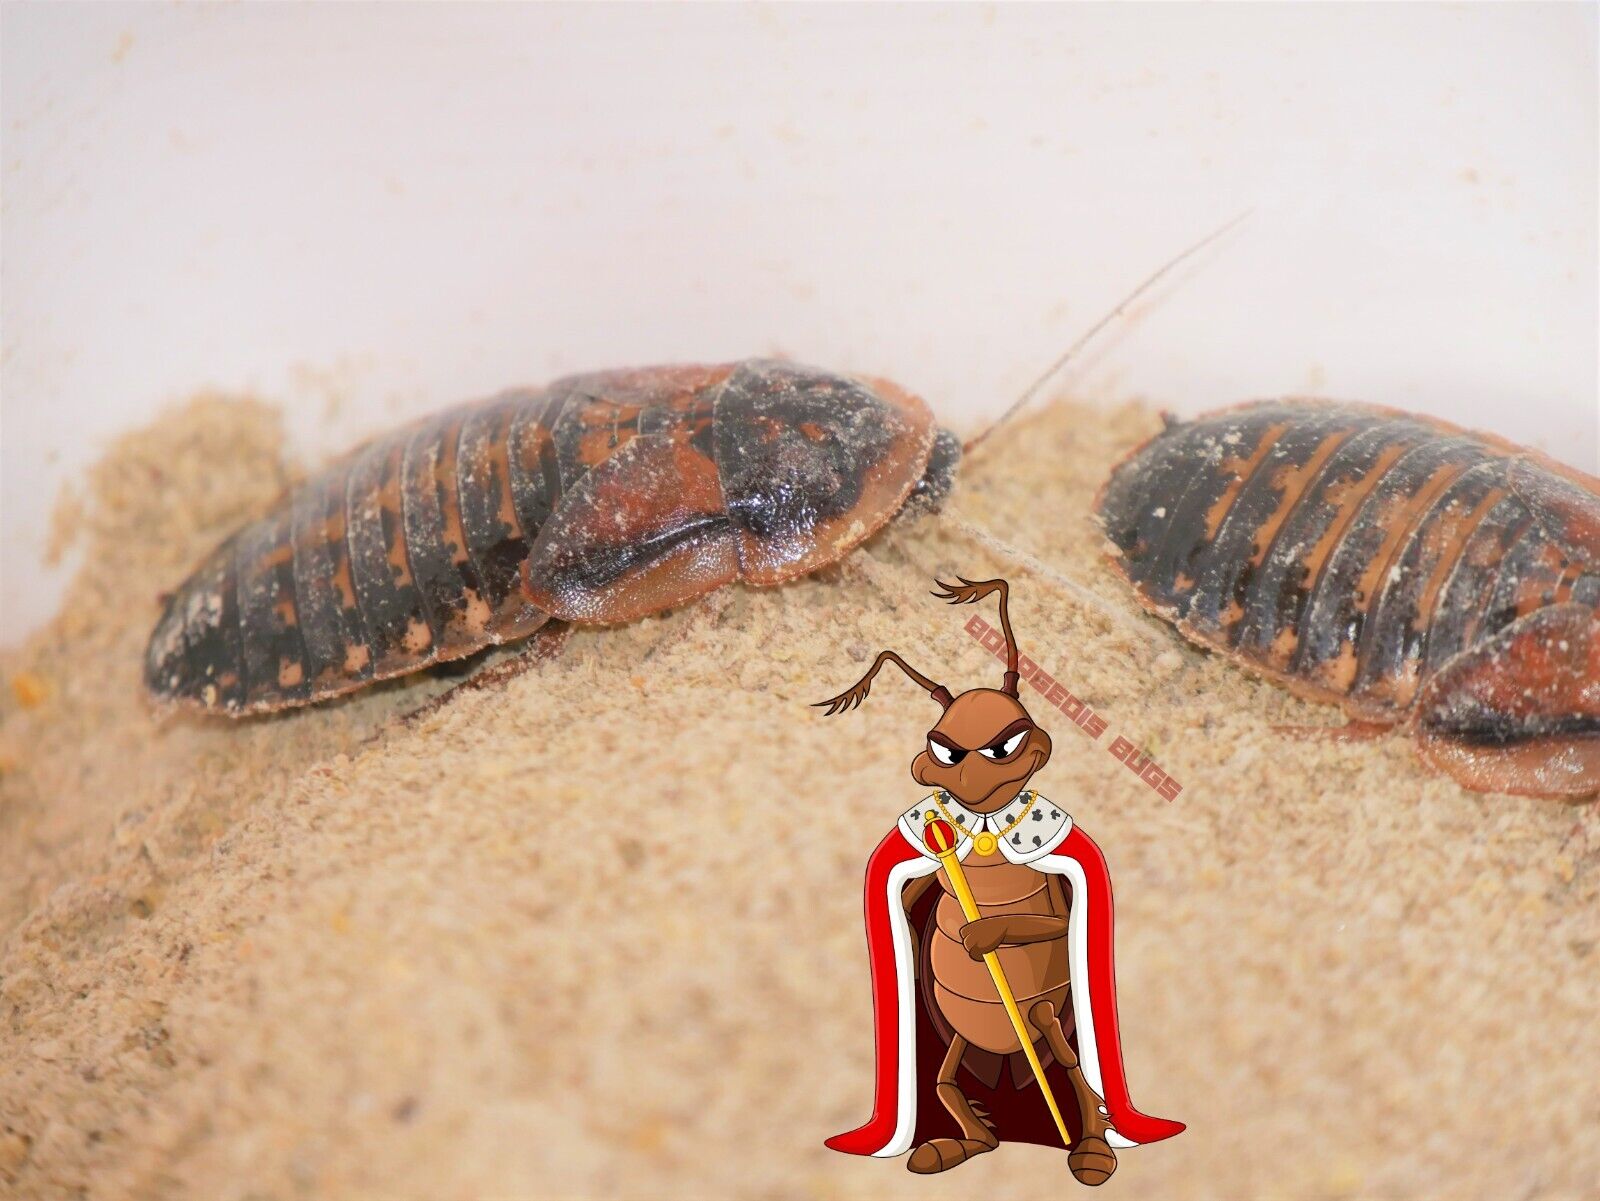 Adult Dubia Roaches, Starter Colony with Food and Babies,